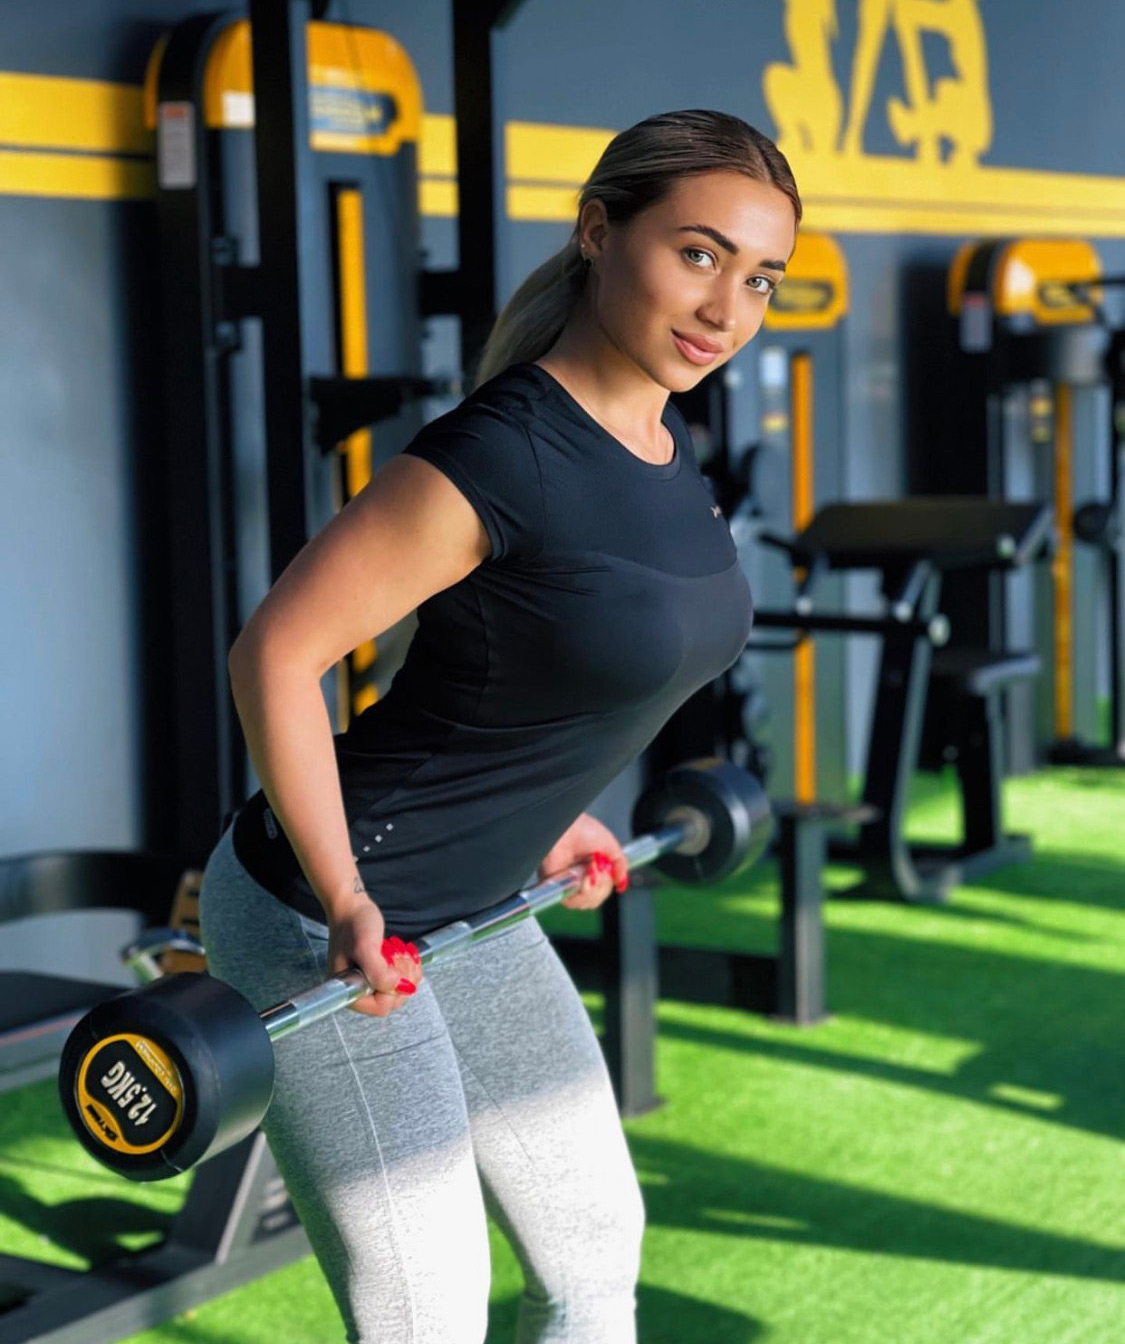 Gym membership `Lady Zone` for 1 month